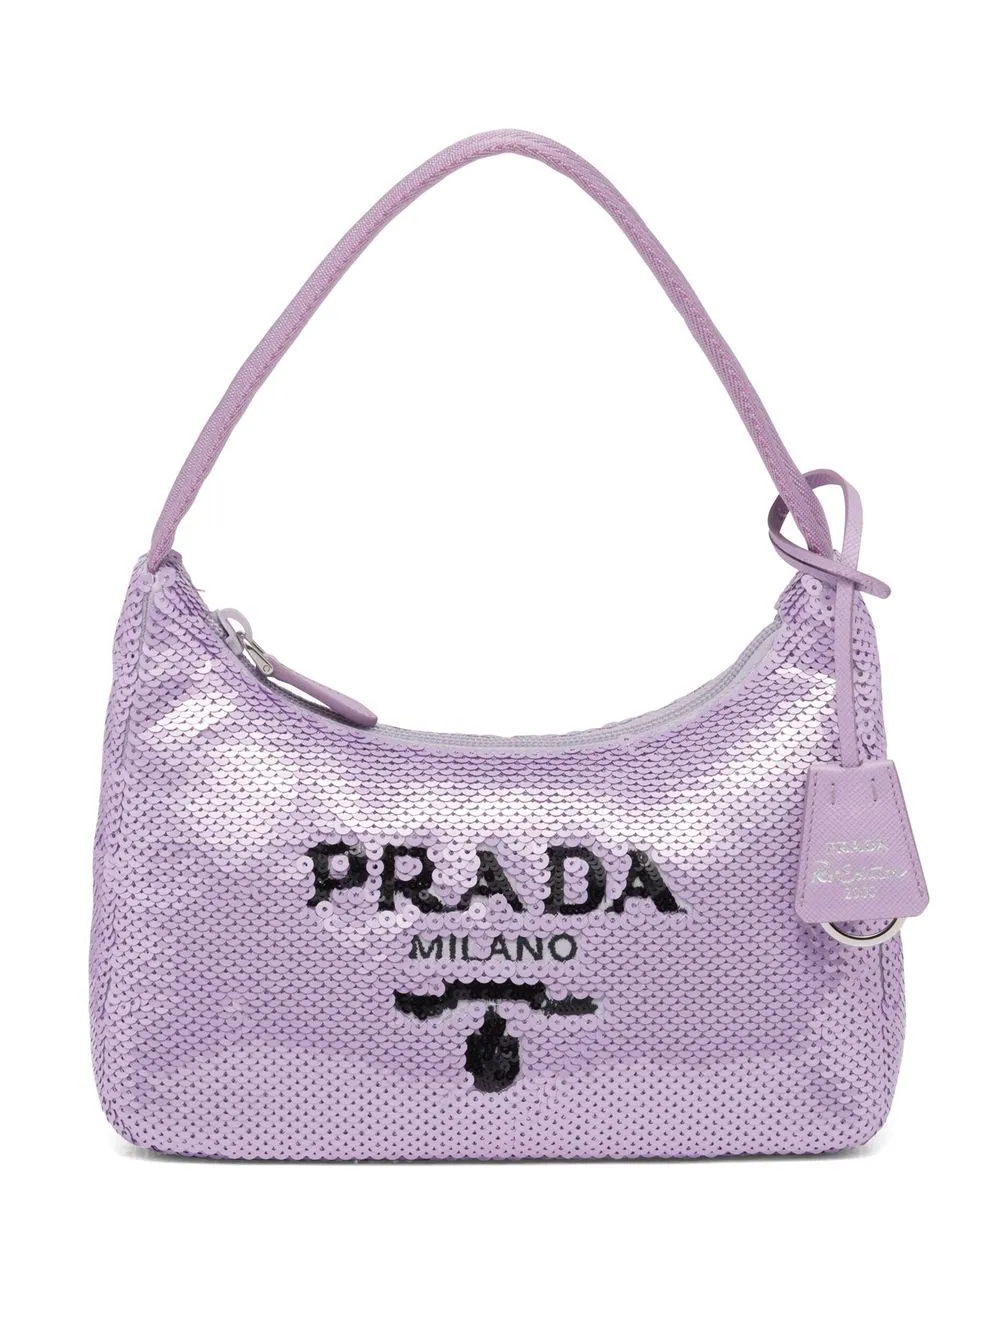 Prada Re-Edition Review and Styling - KatWalkSF